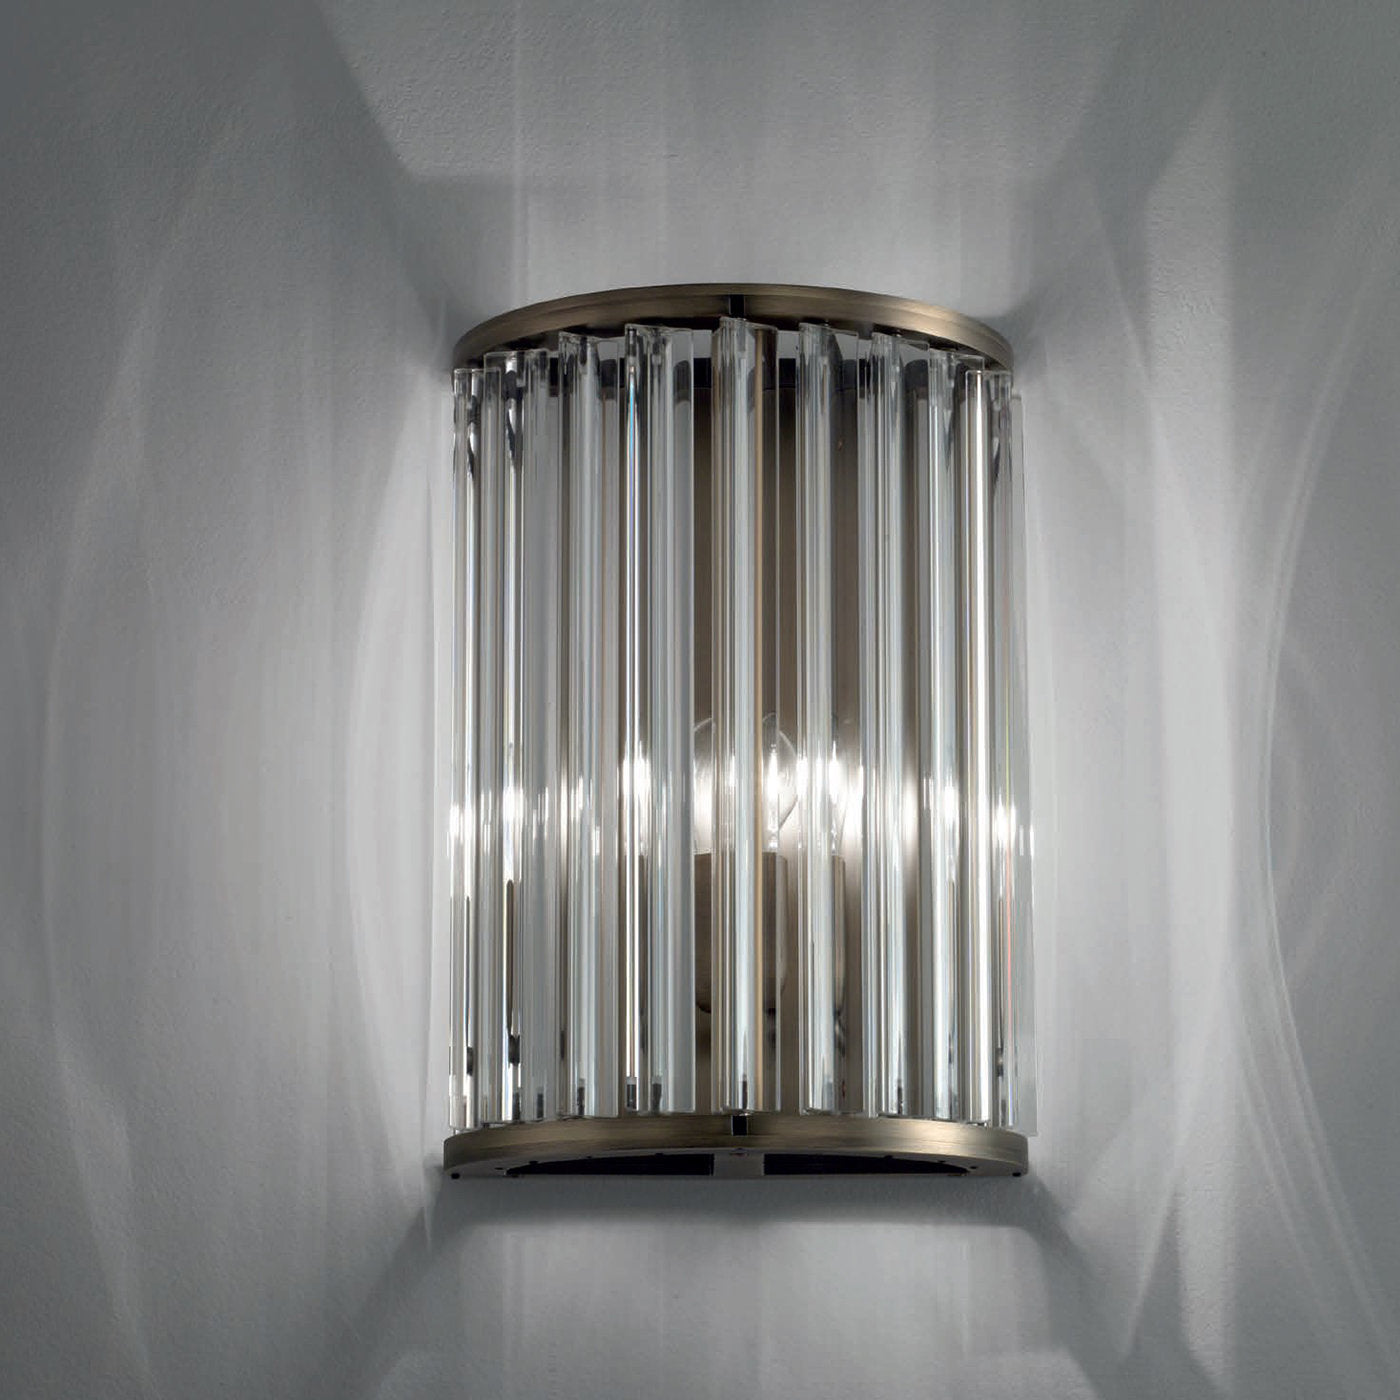 Crown Wall Sconce - Alternative view 1